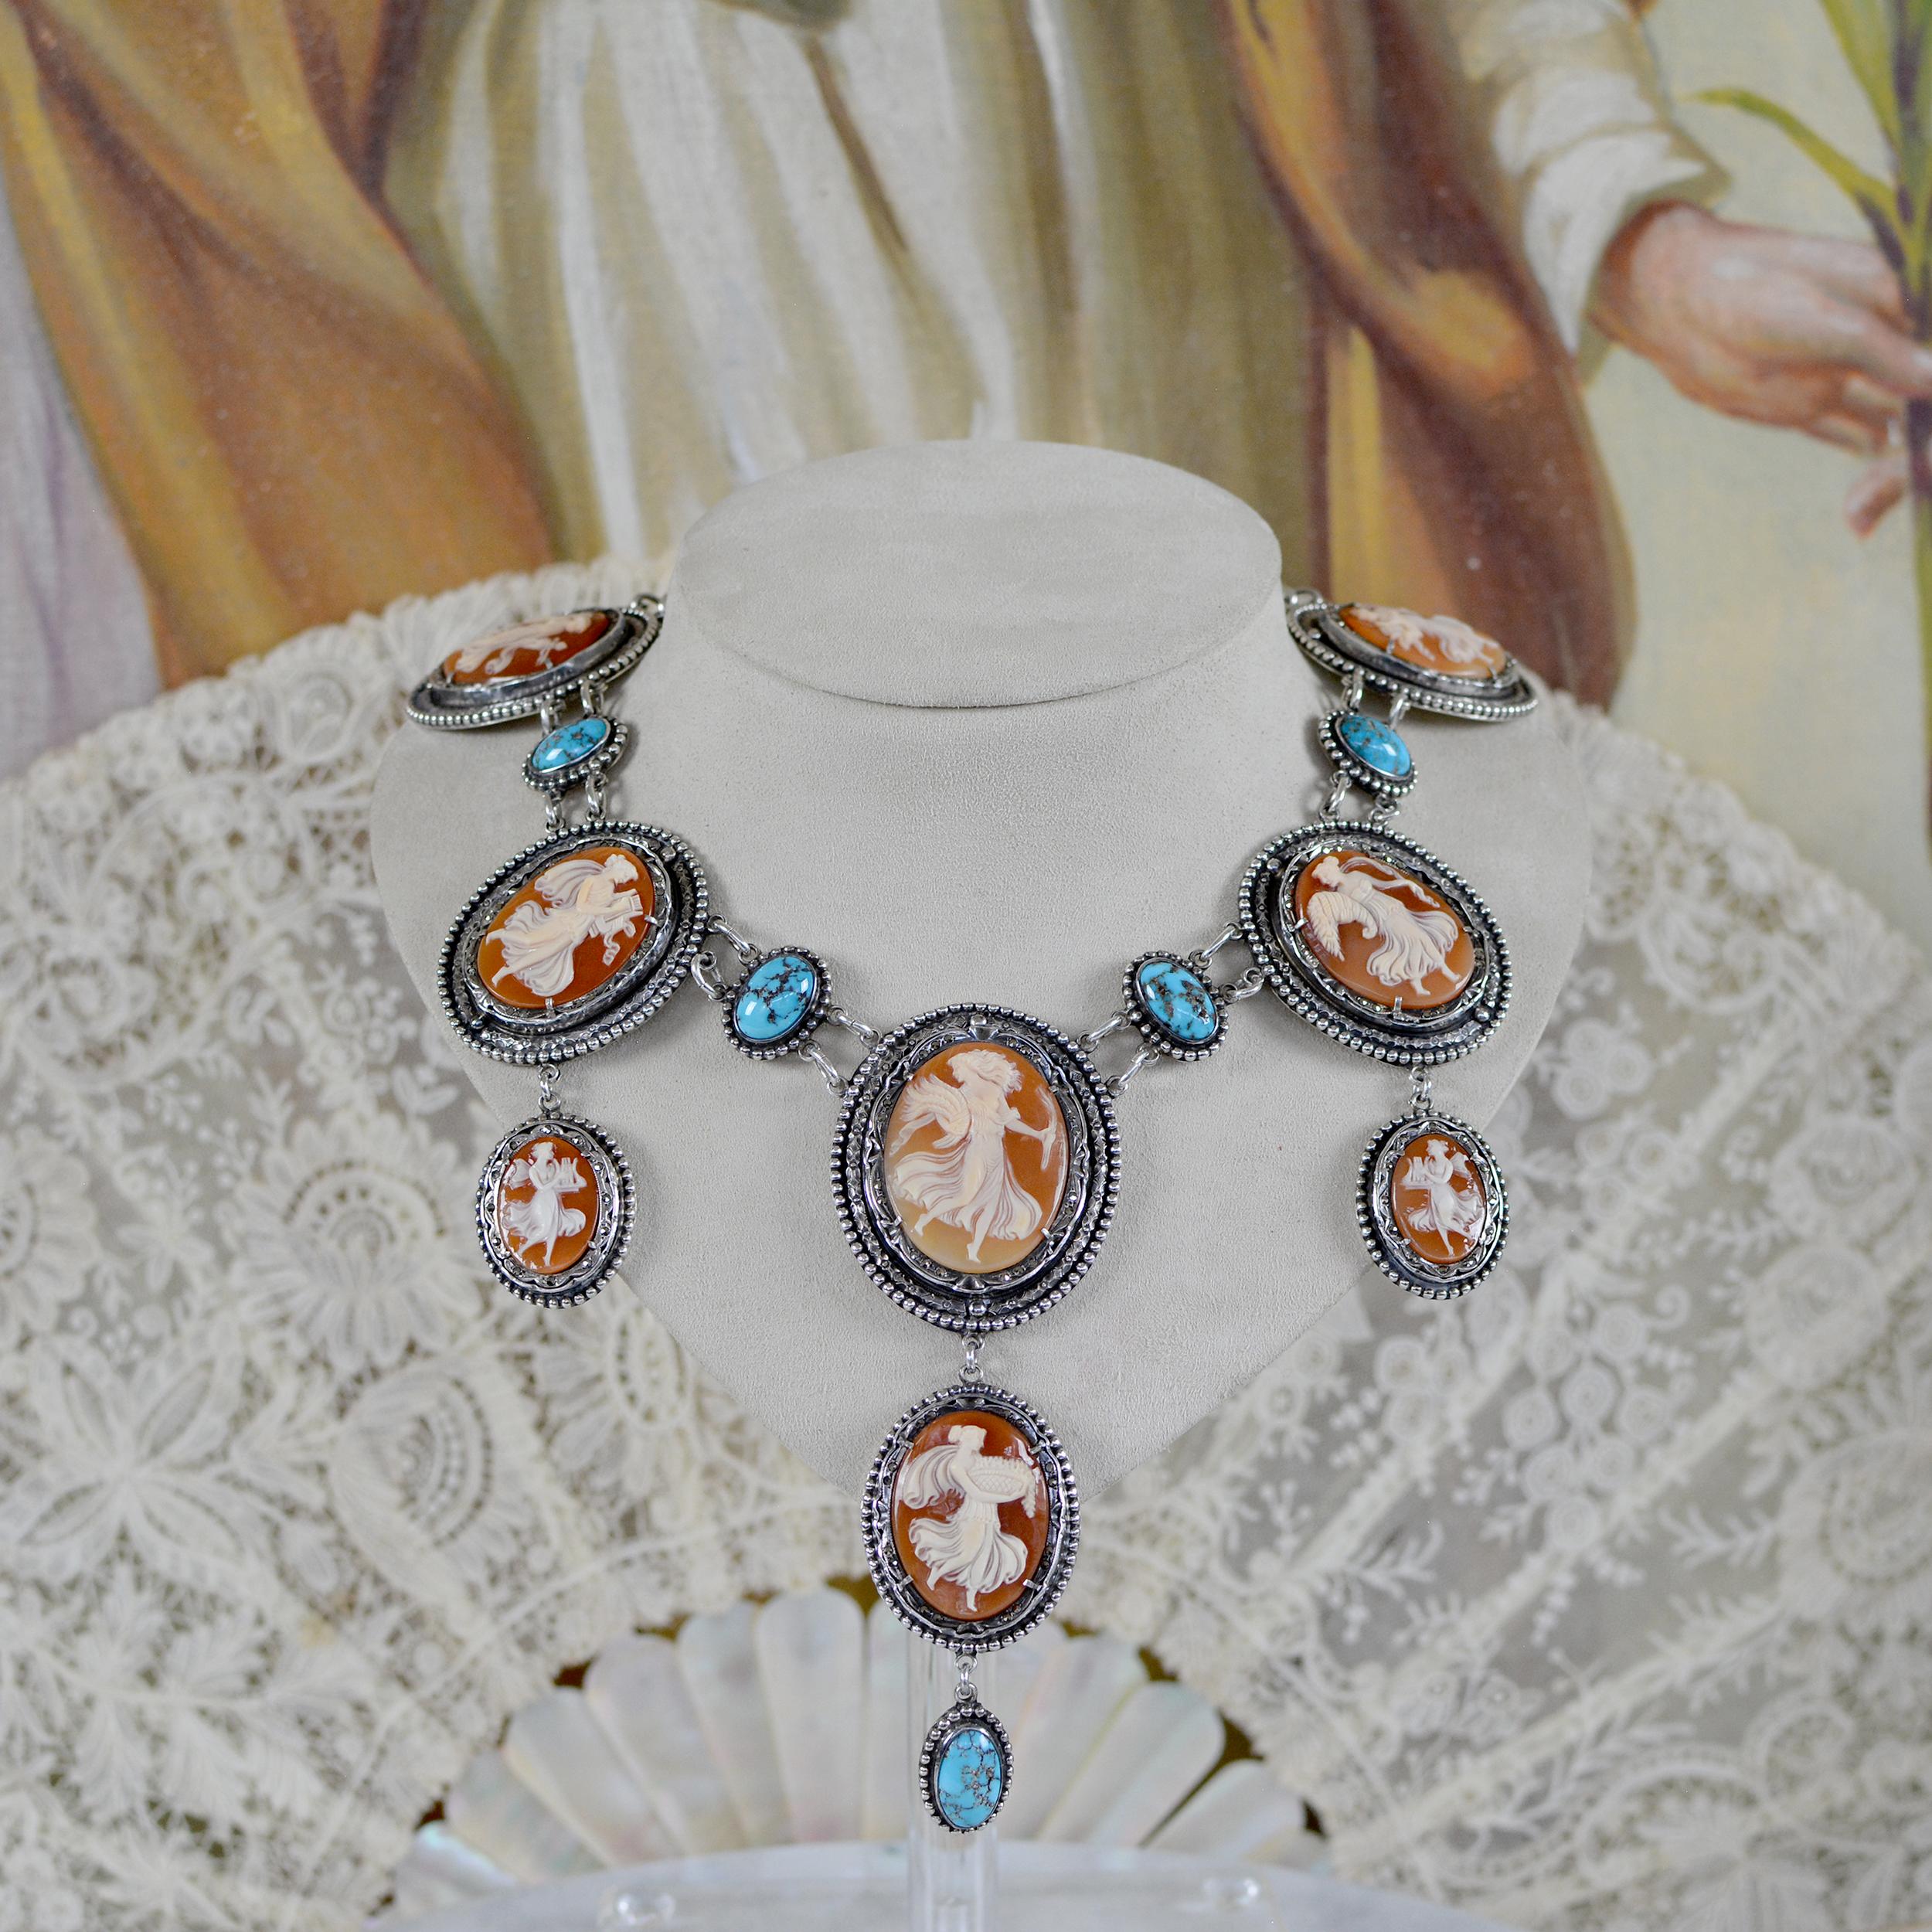 Jill Garber 19th. C. Terpsichore Cameo Suite Necklace with Persian Turquoise  For Sale 7